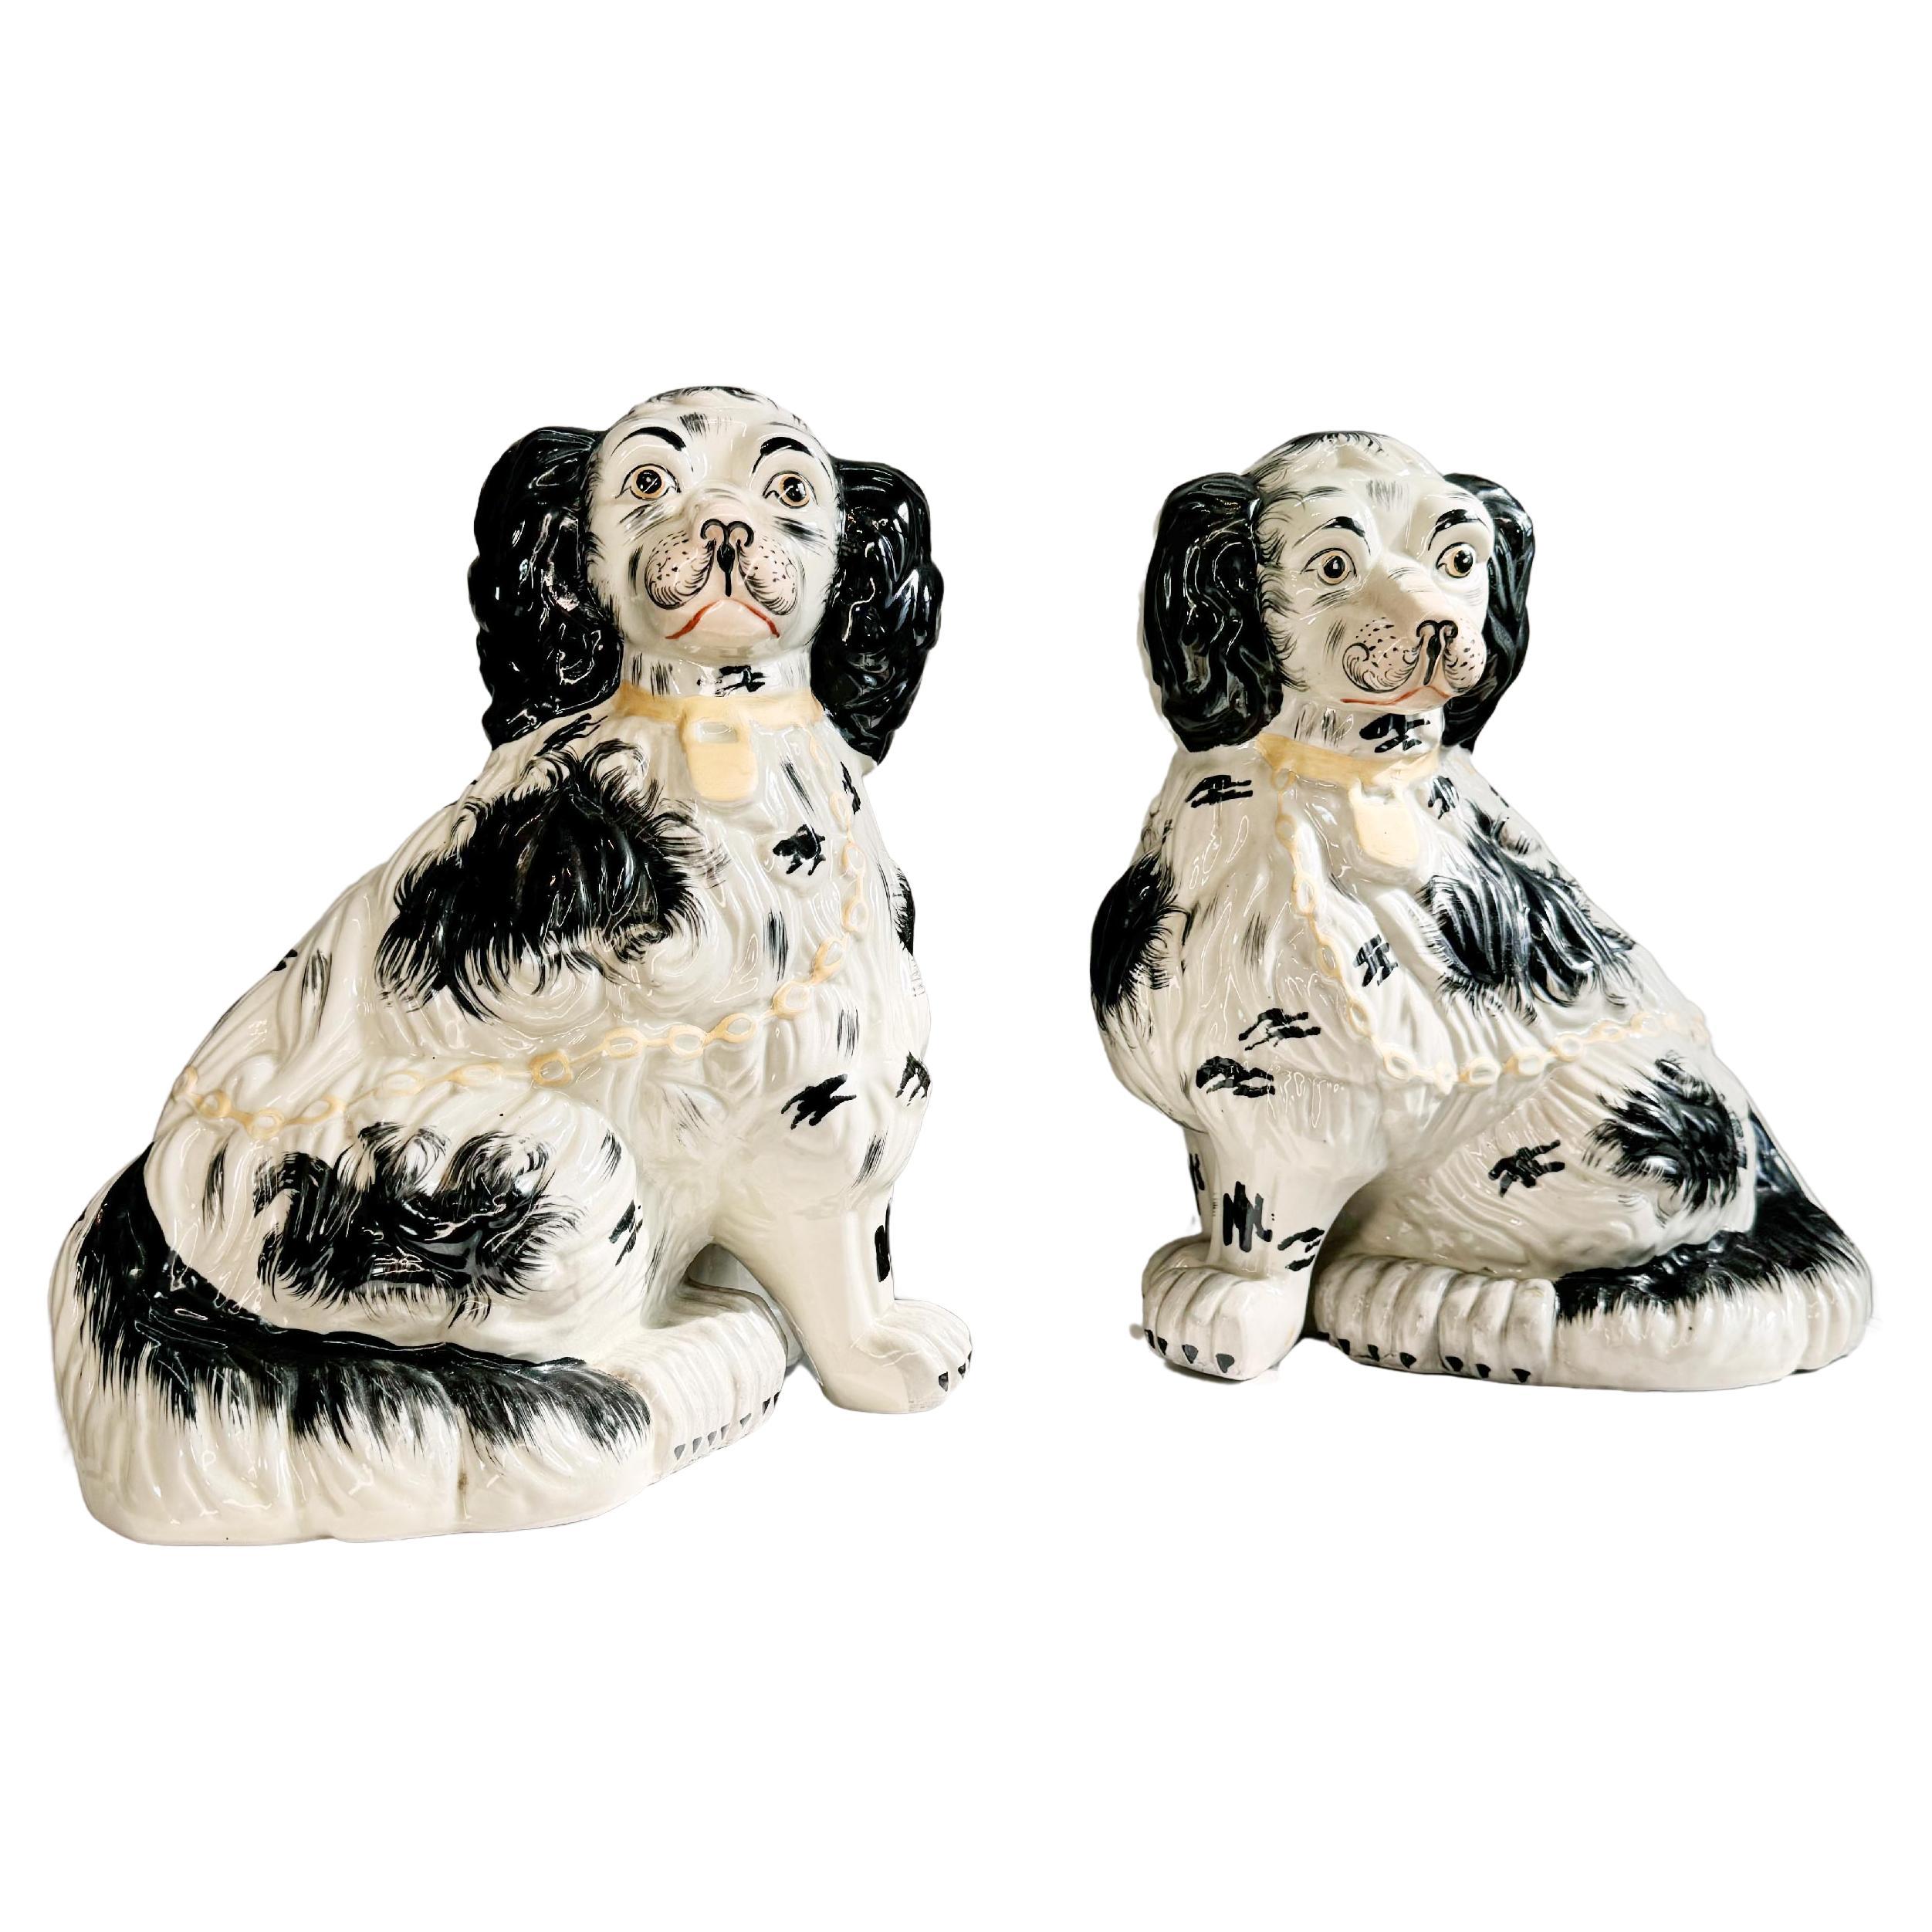  Pair of 19th Century Staffordshire Dogs For Sale